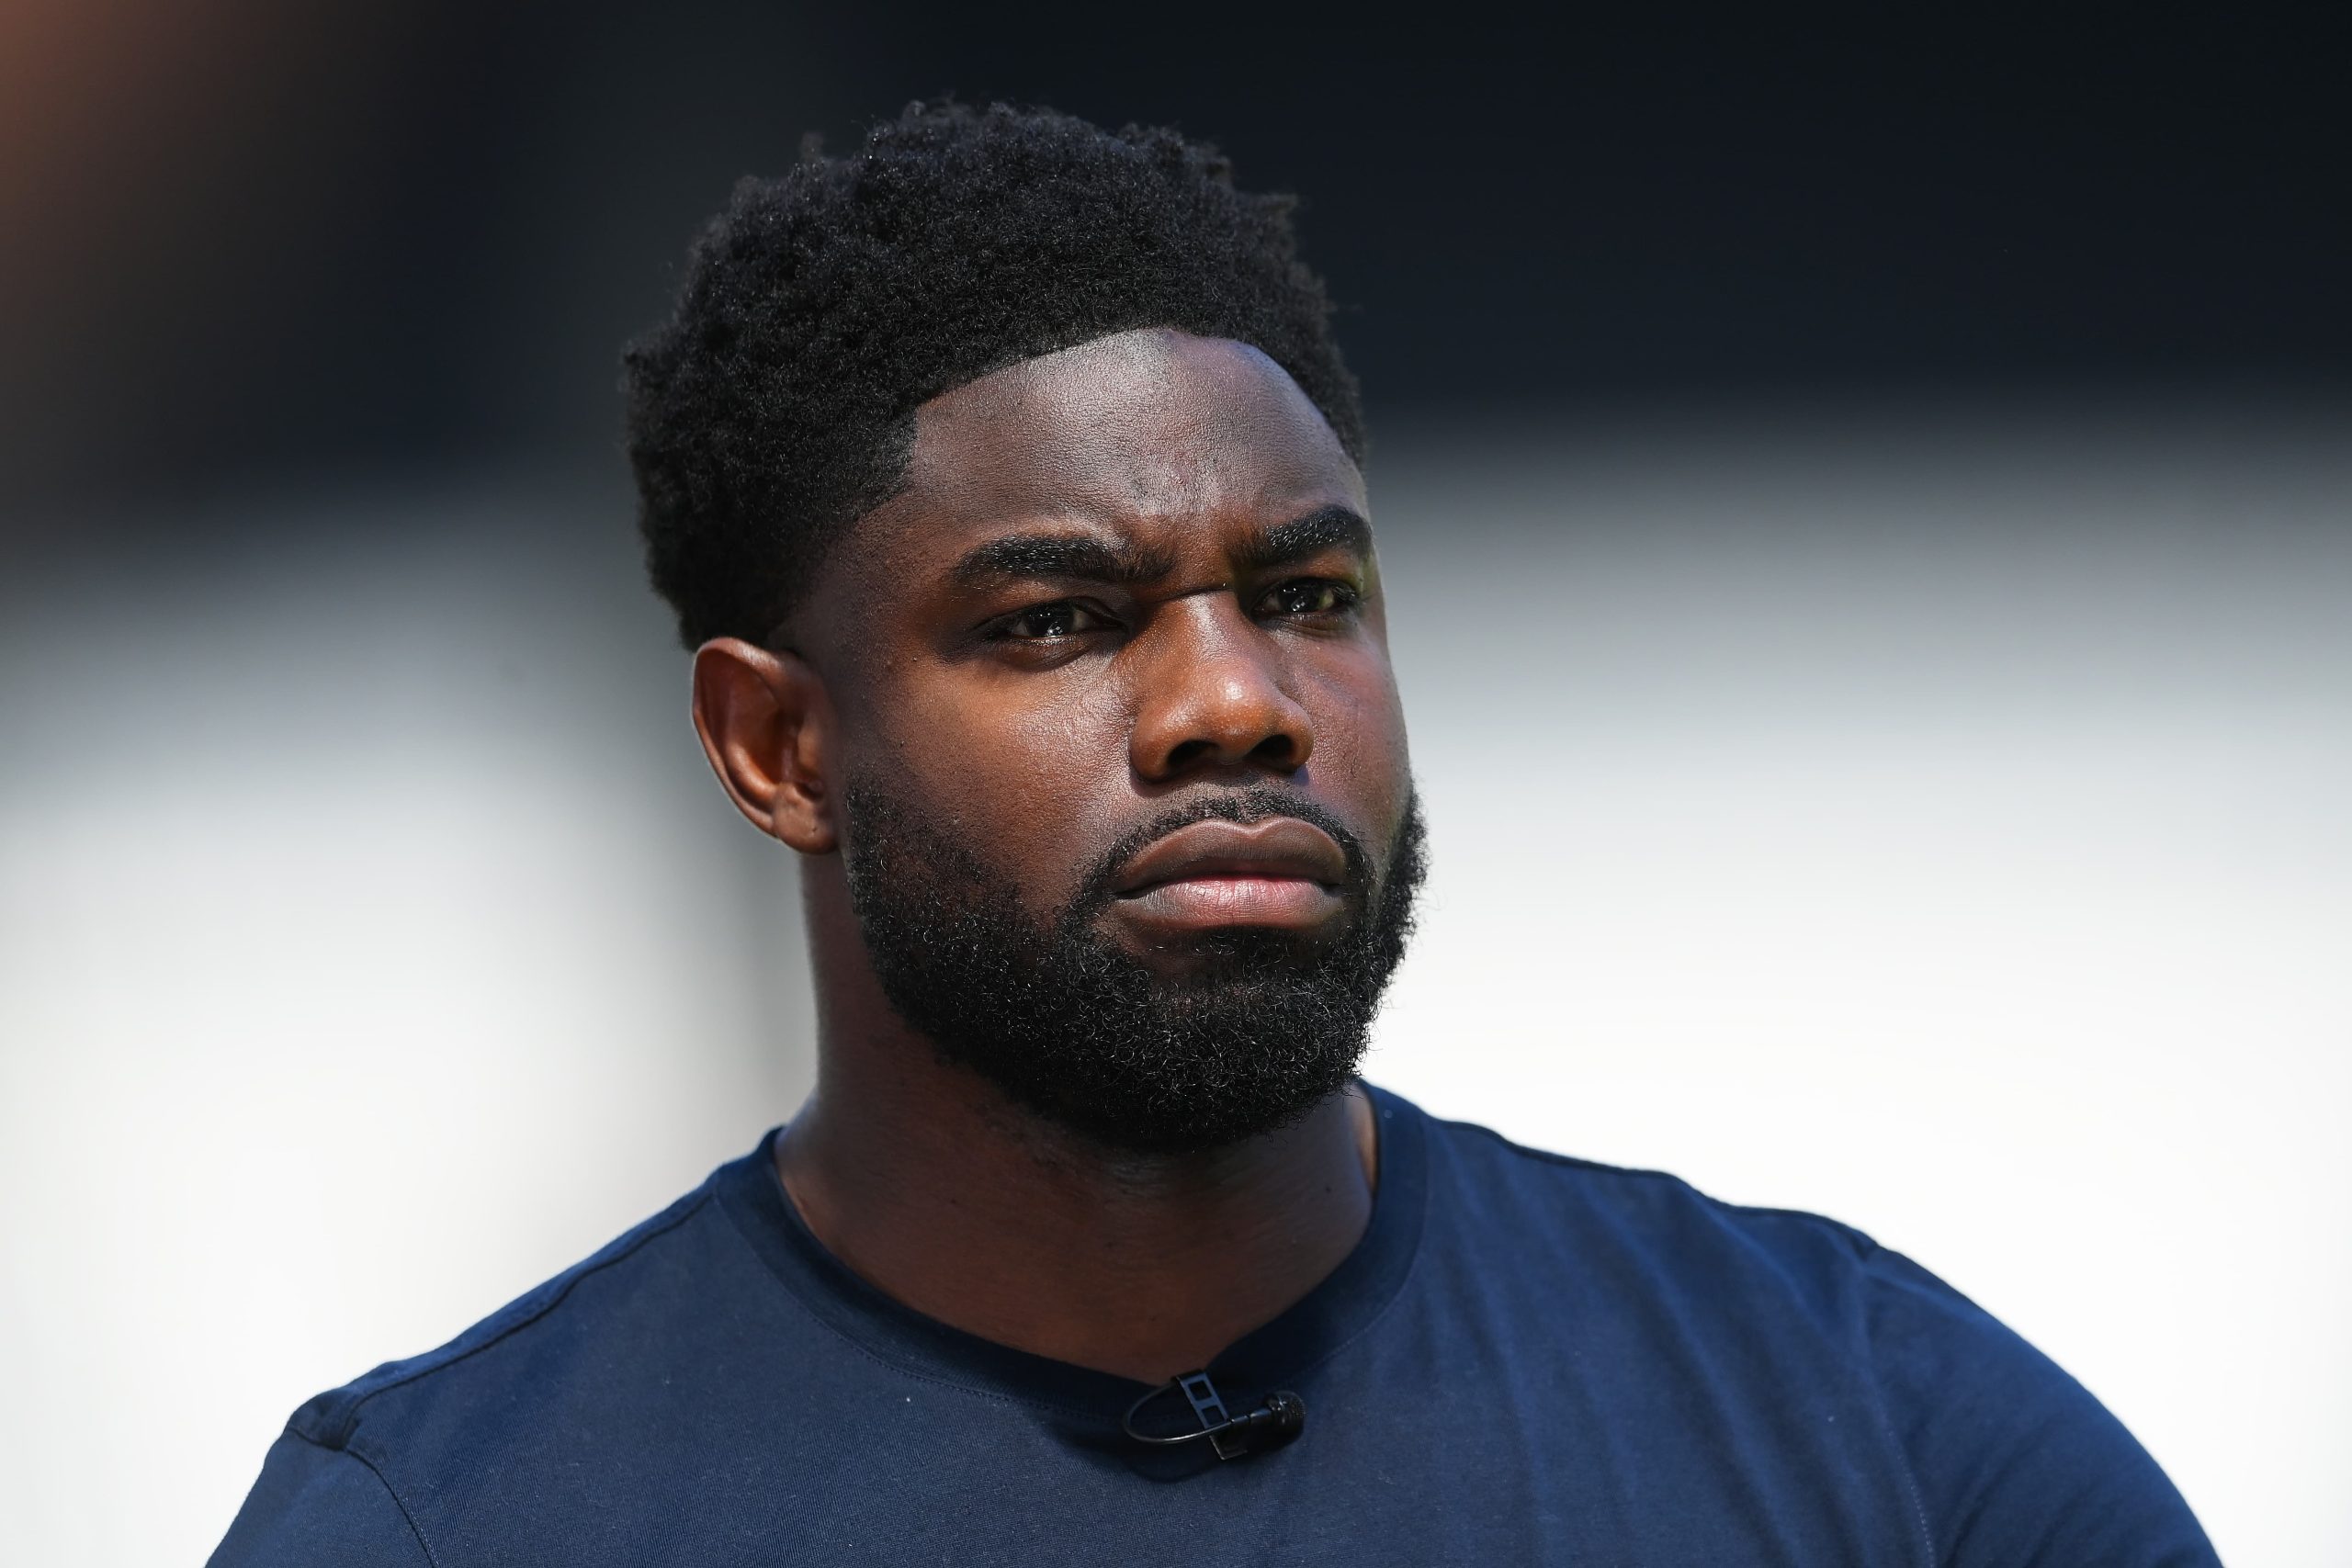 Micah Richards criticizes out-of-position full-back following his ‘nightmare’ performance against Liverpool